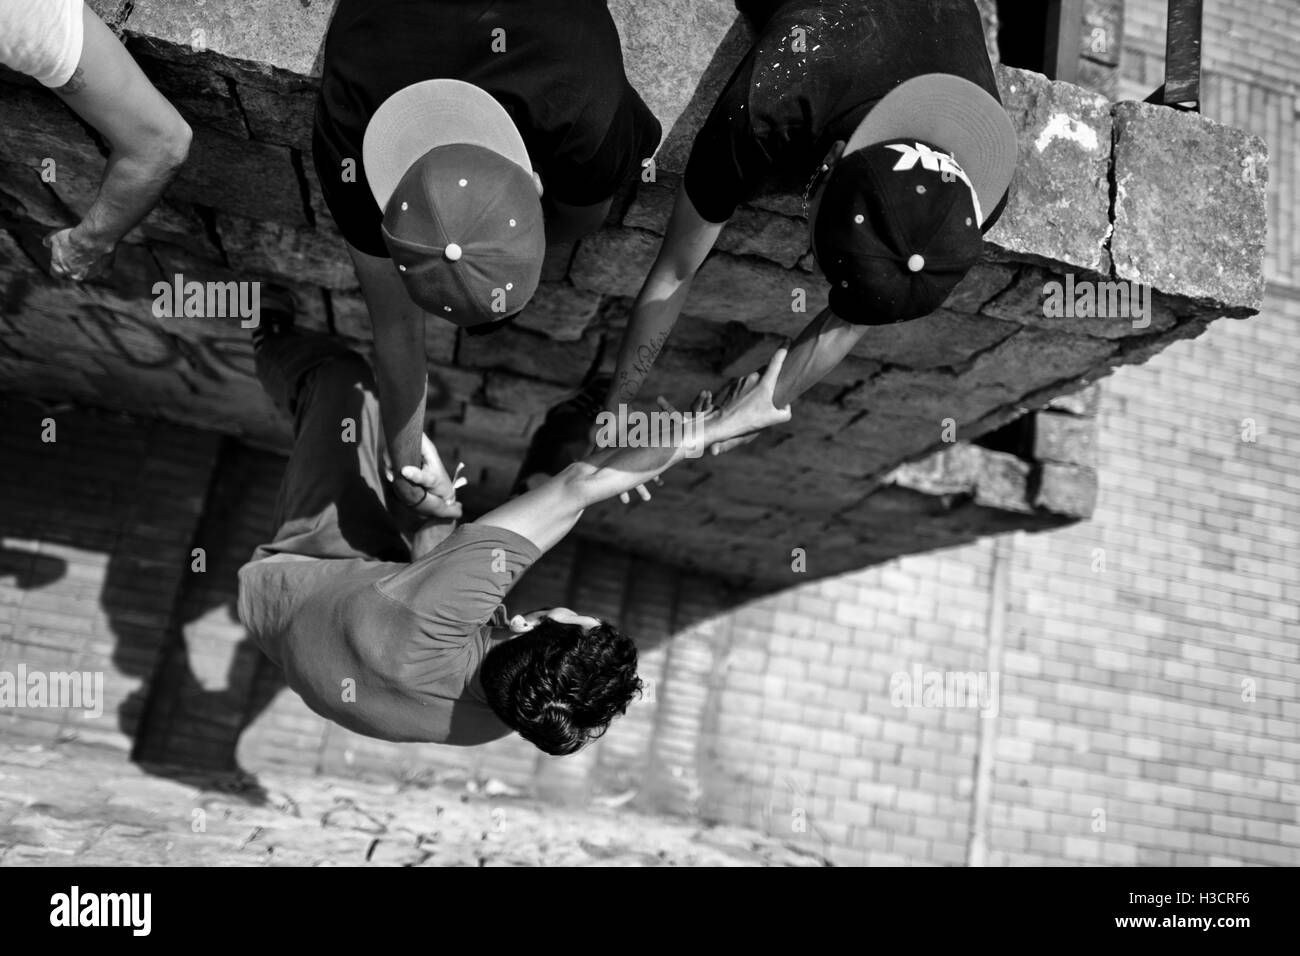 A Colombian parkour runner, hung on his mates’ hands, climbs on the wall during a training in a park in Bogotá, Colombia. Stock Photo